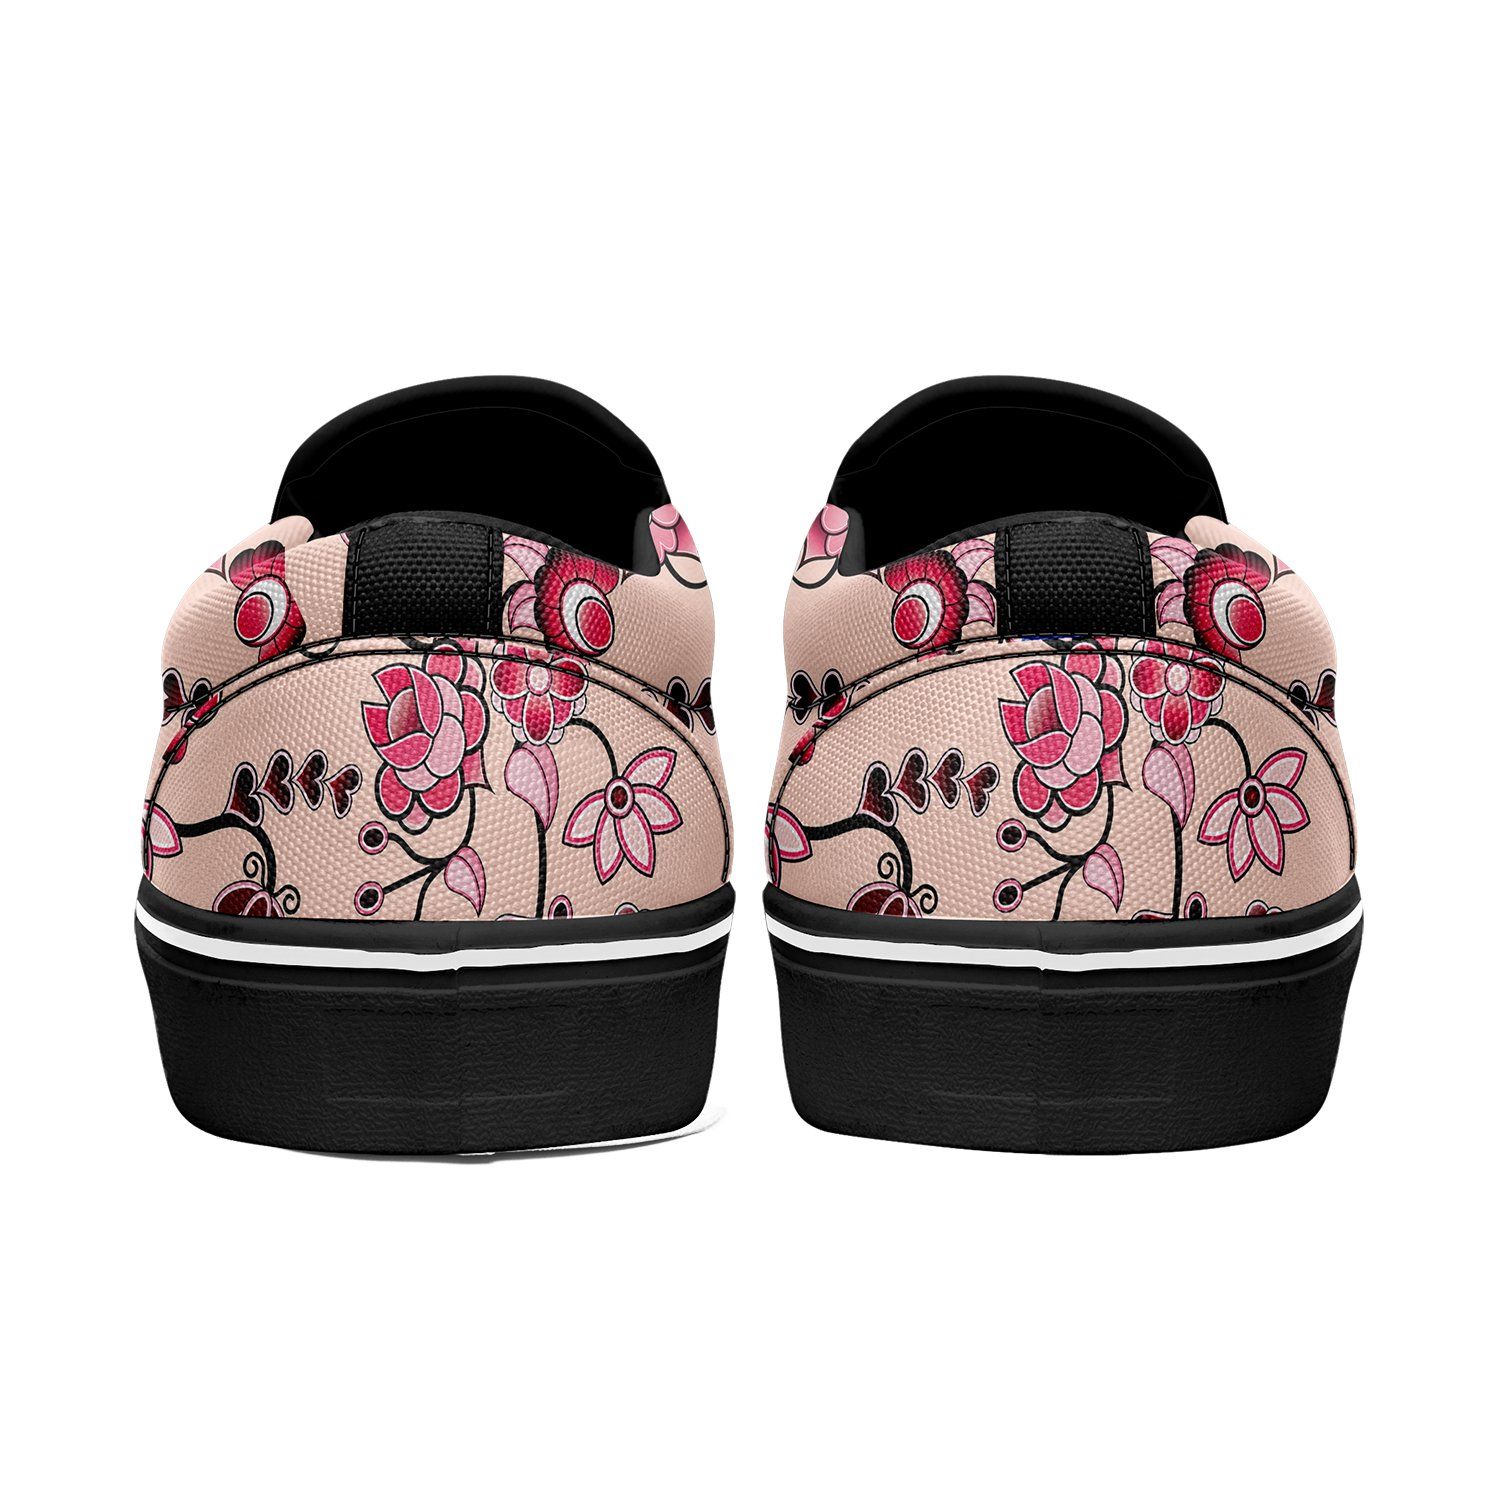 Floral Amour Otoyimm Canvas Slip On Shoes otoyimm Herman 